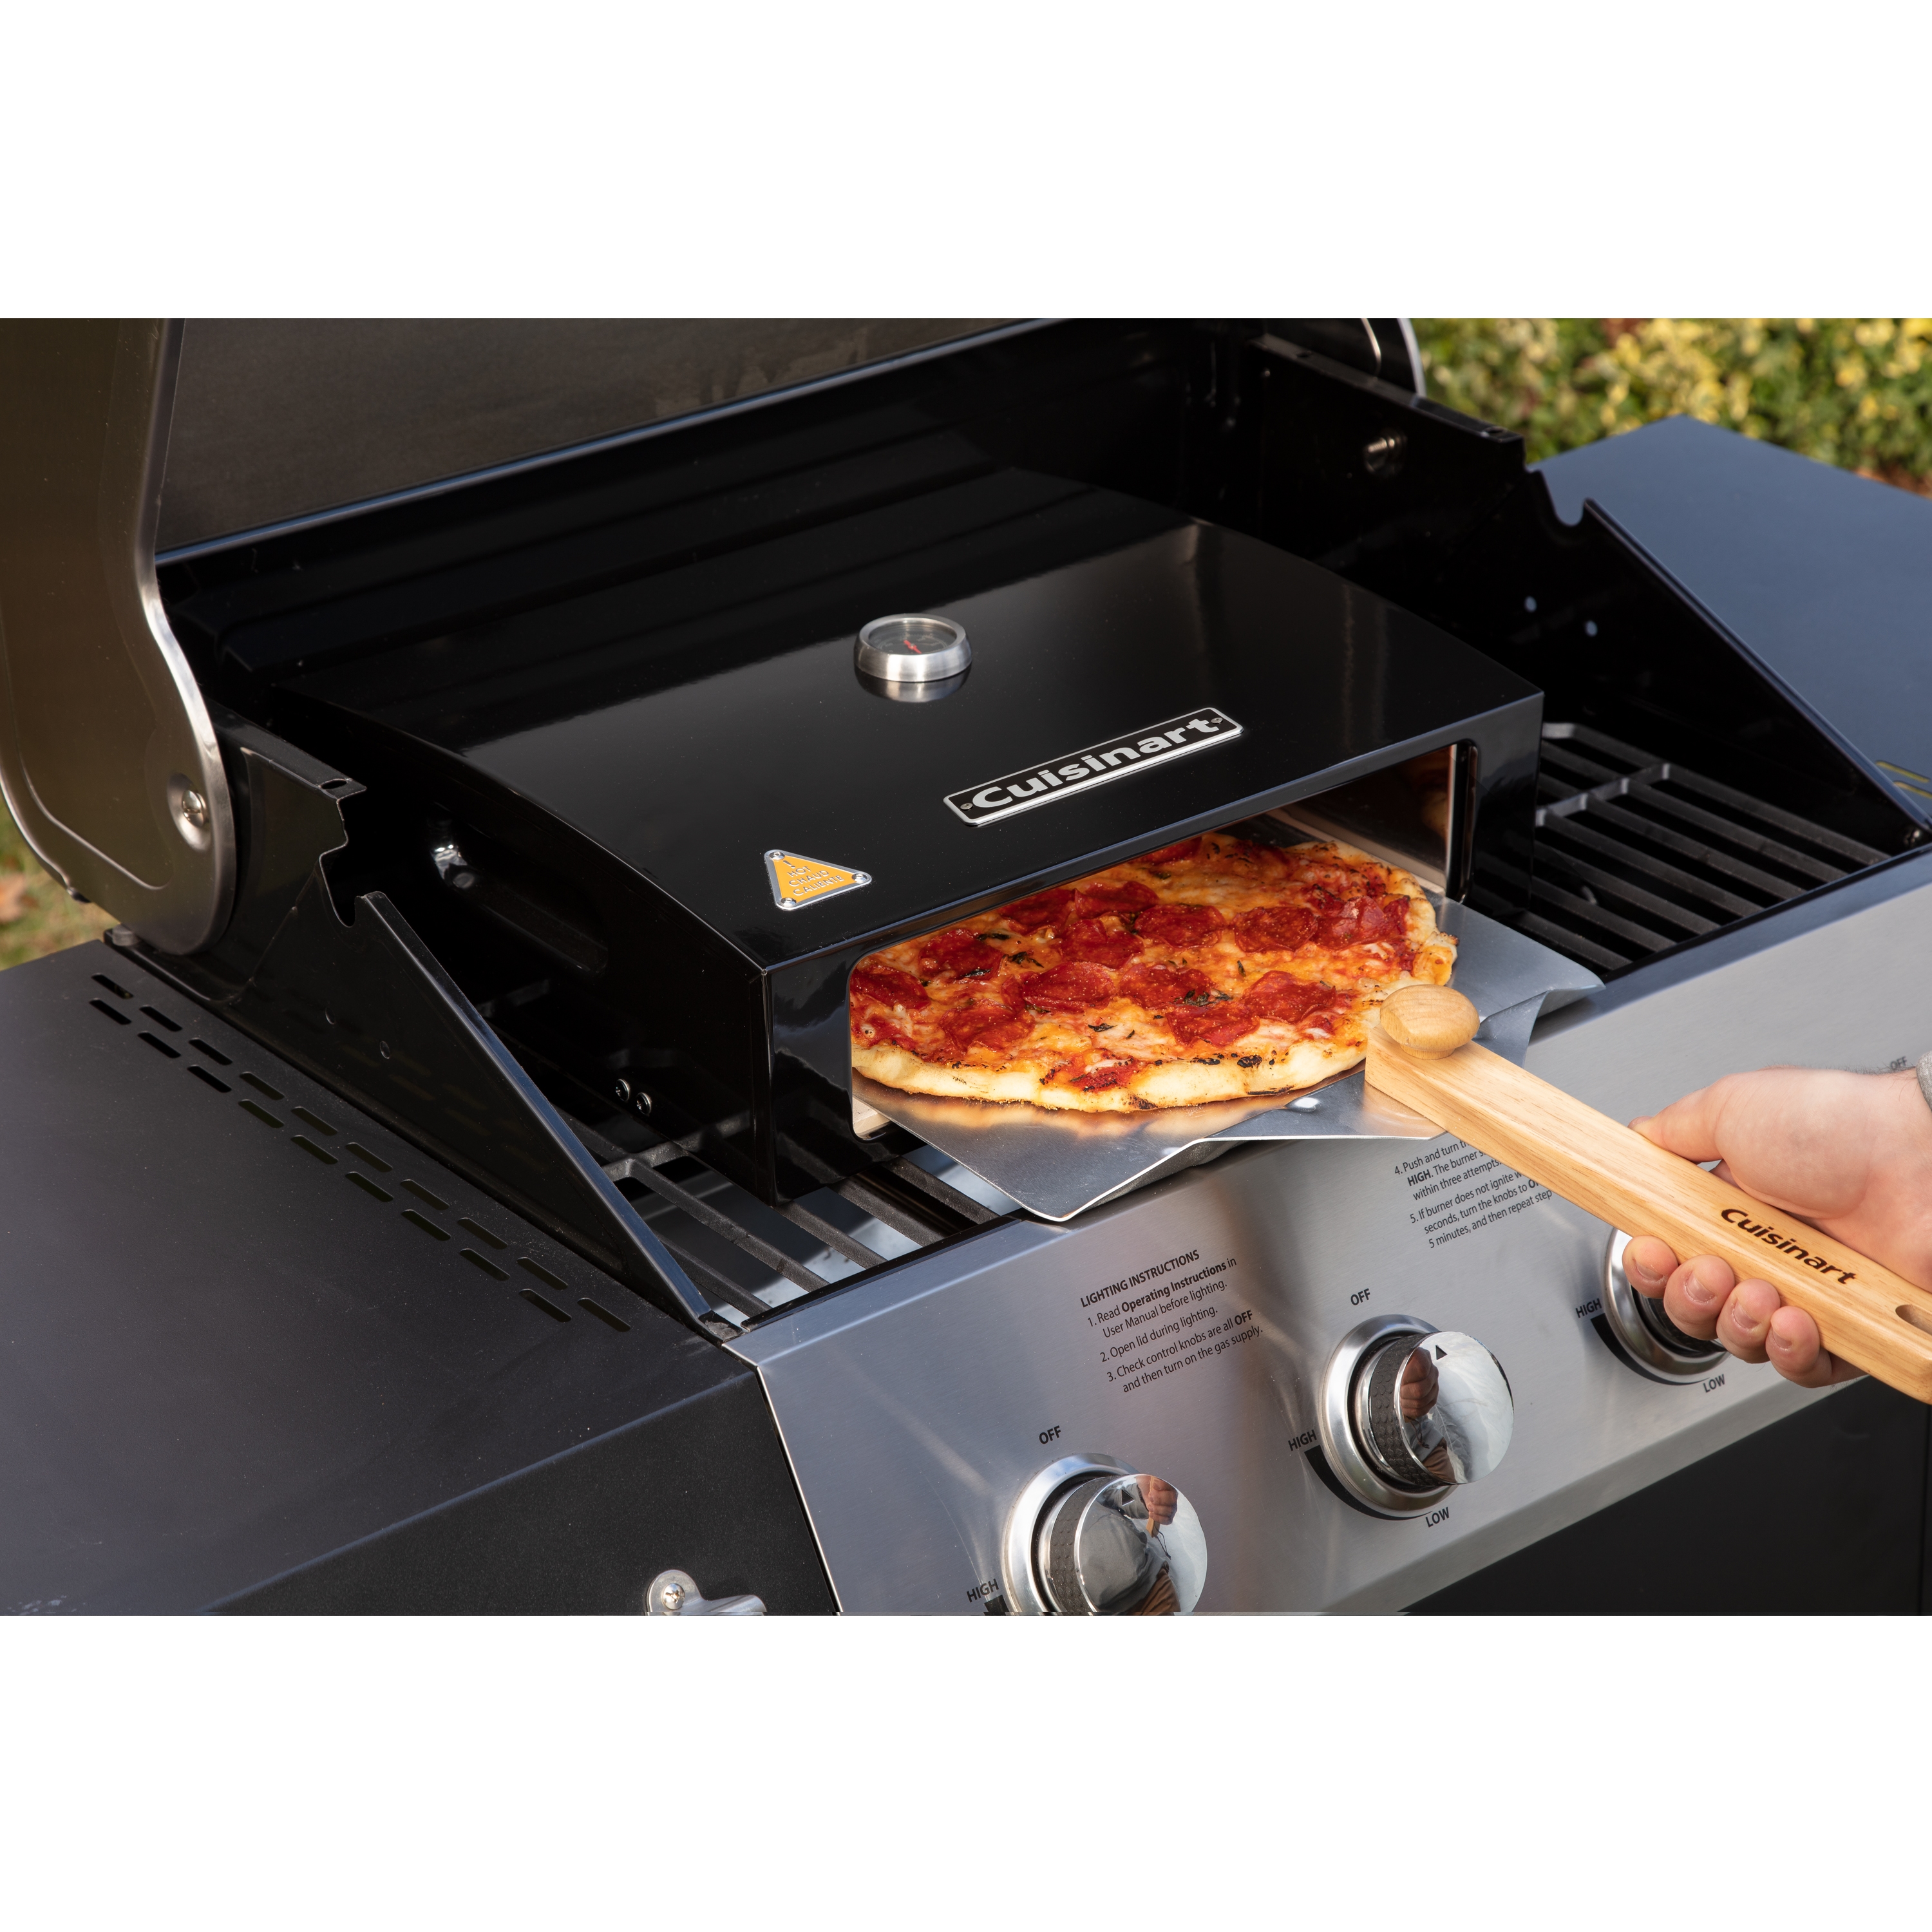 https://www.cuisinart.com/globalassets/cuisinart-image-feed/cpo-700/cpo-700-pepperoni-pizza-lifestyle_3000-1.jpg